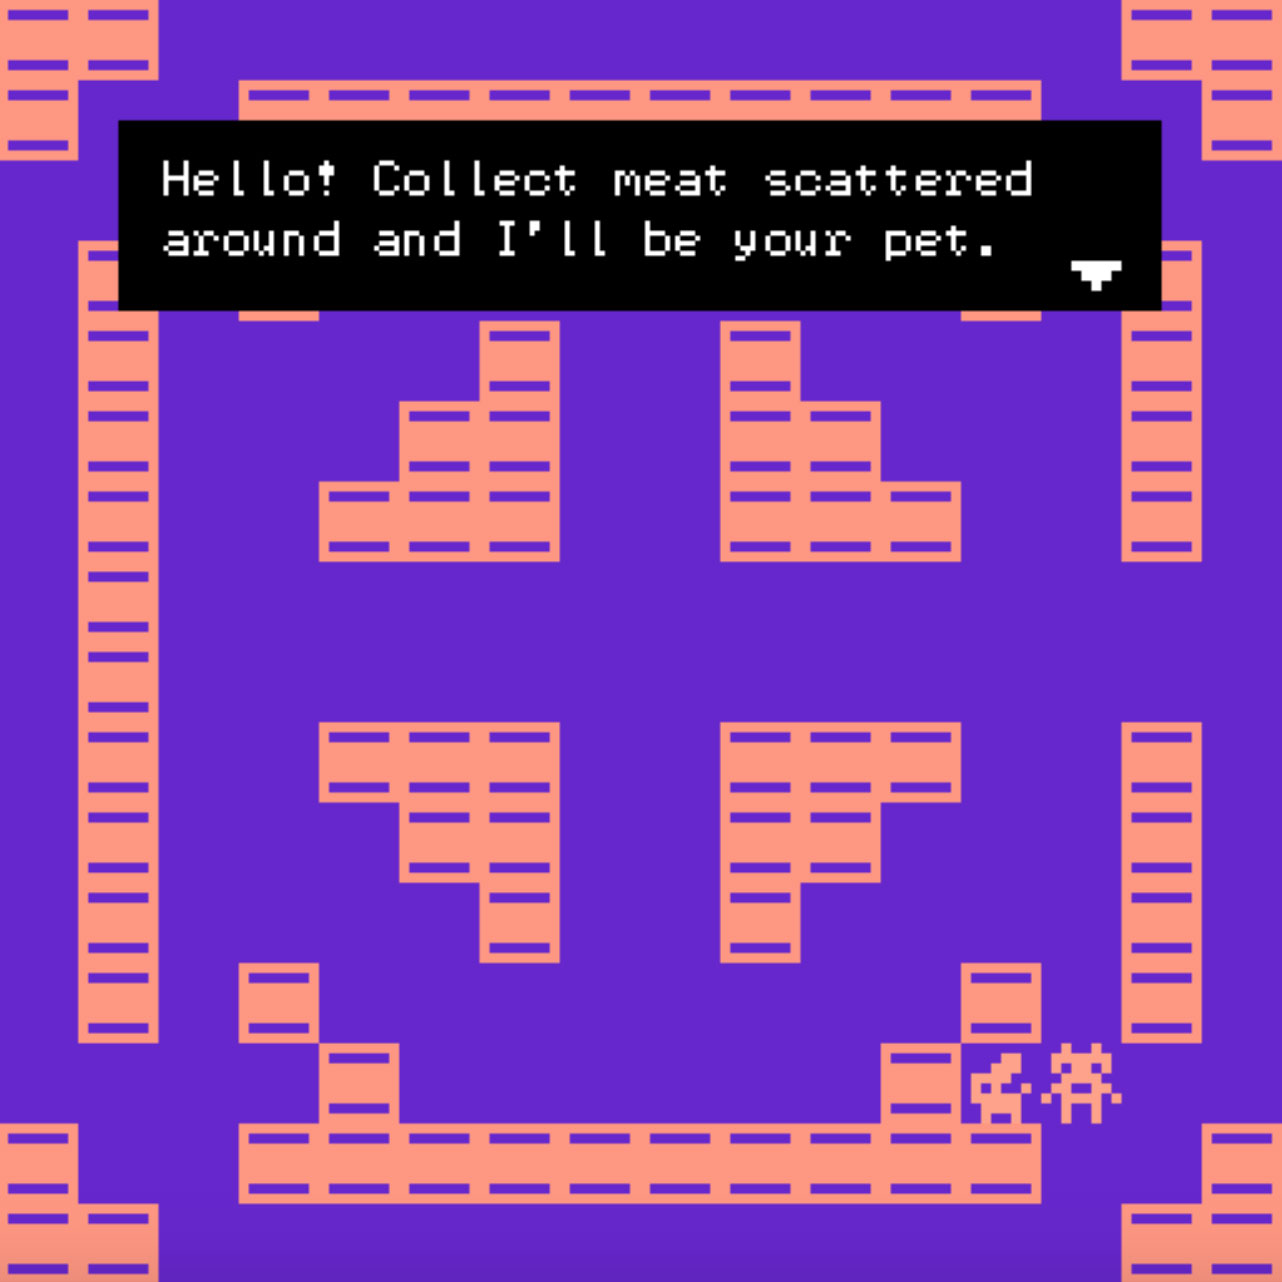 A digital art work with a purple background and pink squares dotted around the square. Text displayed in a black text box